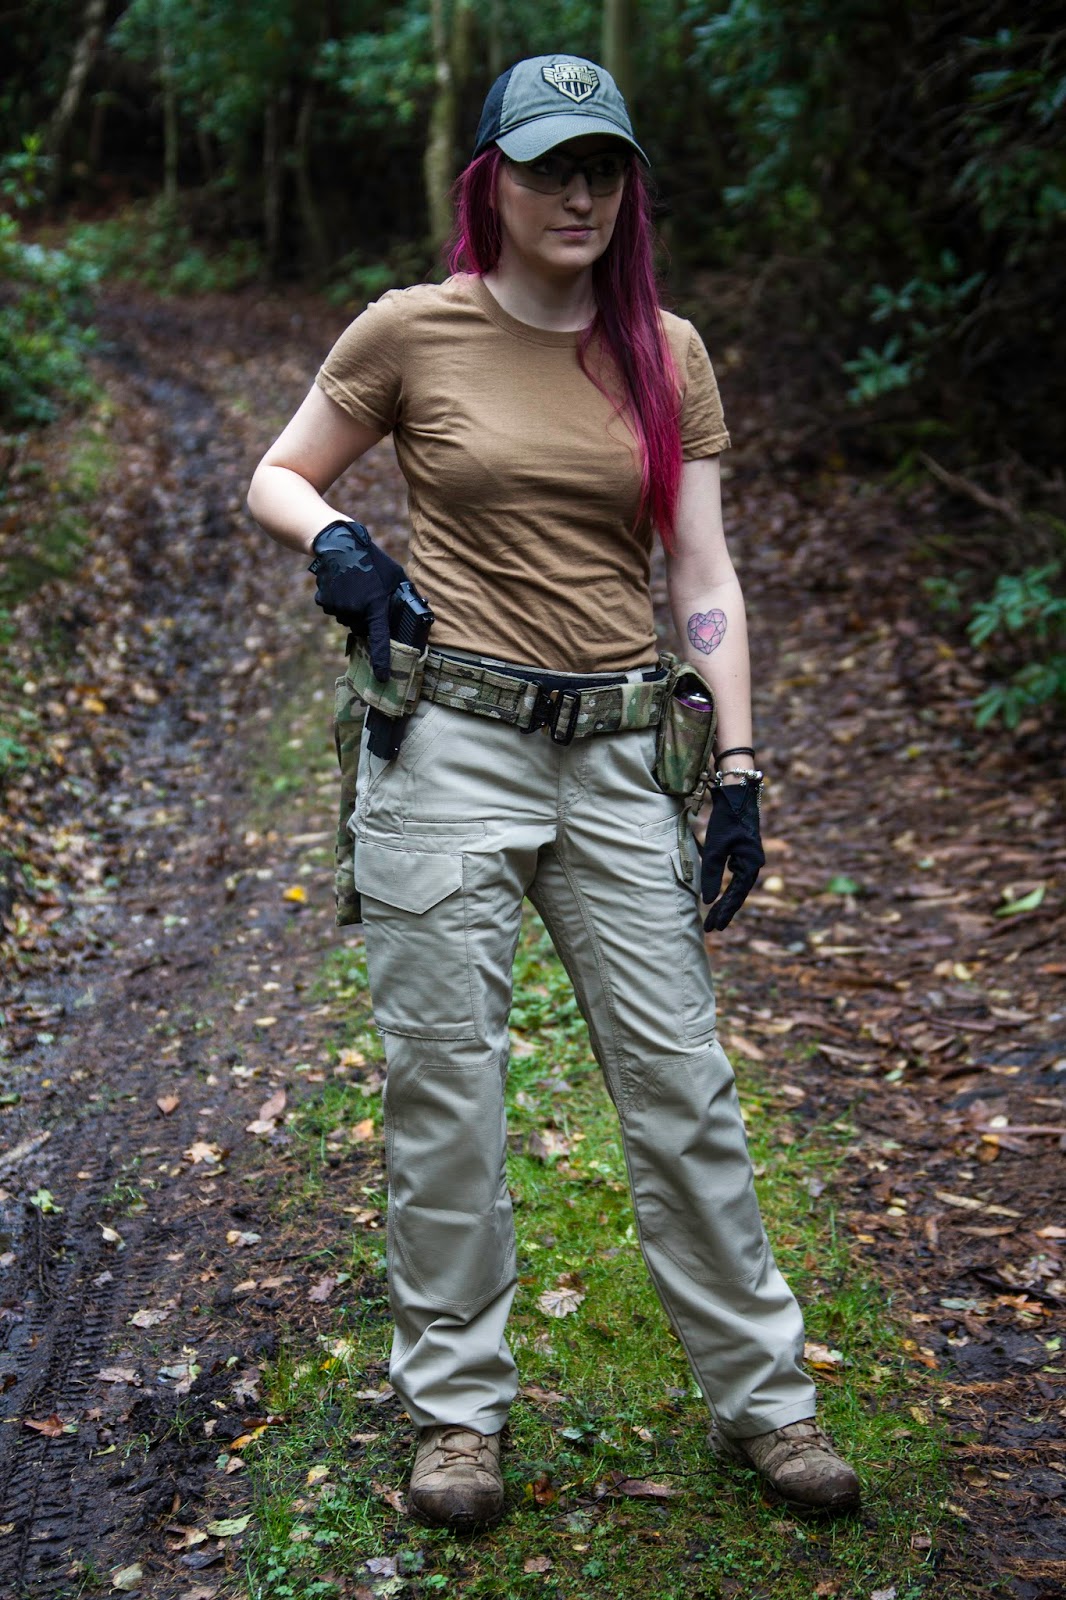 FIRST TACTICAL WOMEN'S SPECIALIST TACTICAL PANTS REVIEW! - Femme